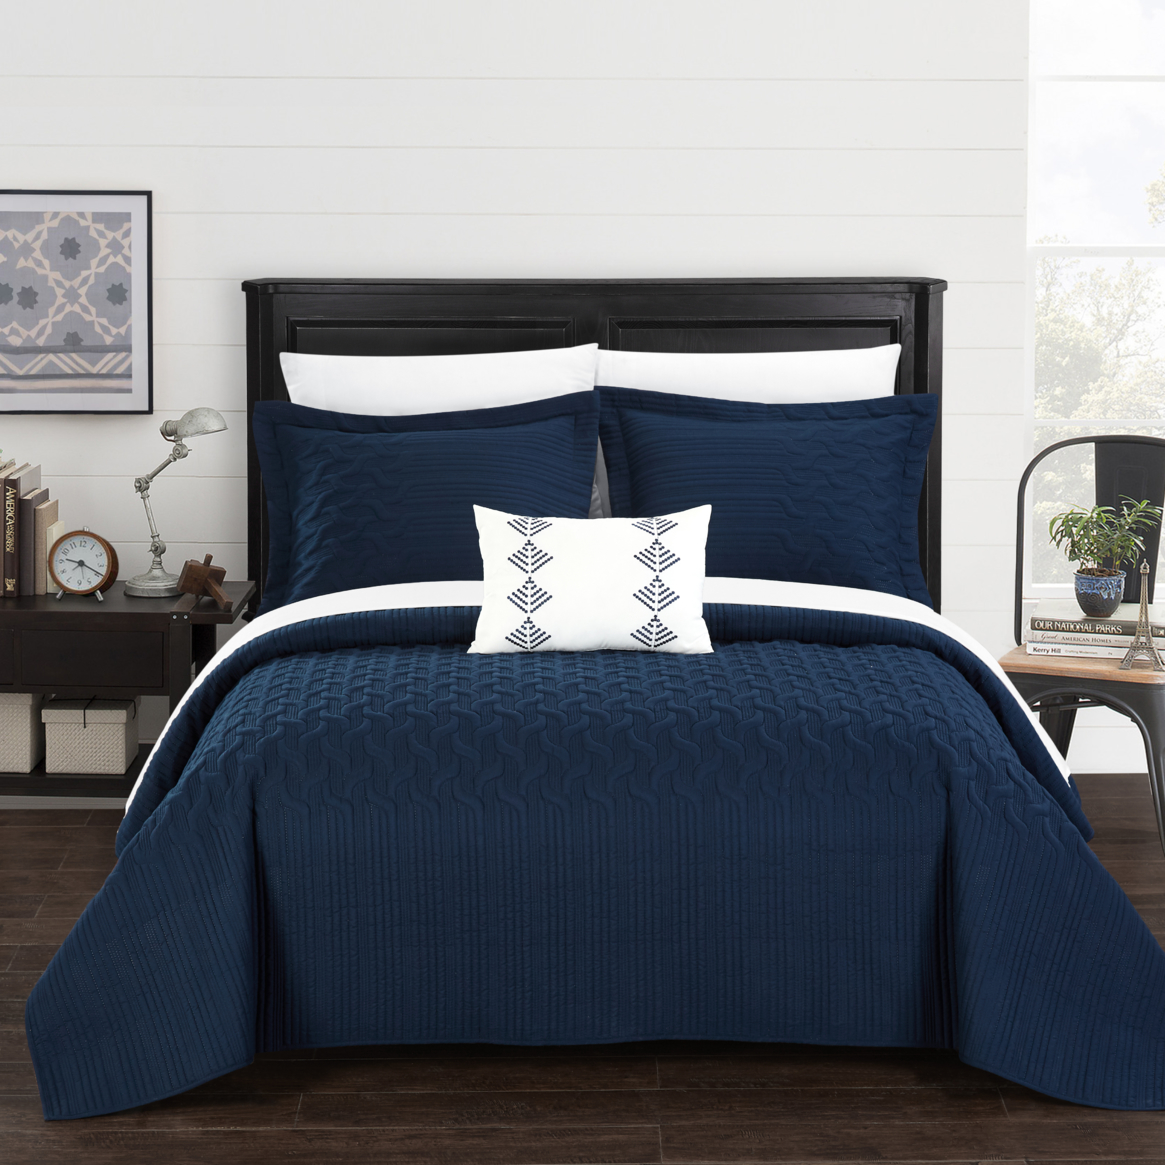 Shaliya 8 Or 6 Piece Quilt Cover Set Interlaced Vine Pattern Quilted Bed In A Bag - Navy, Twin